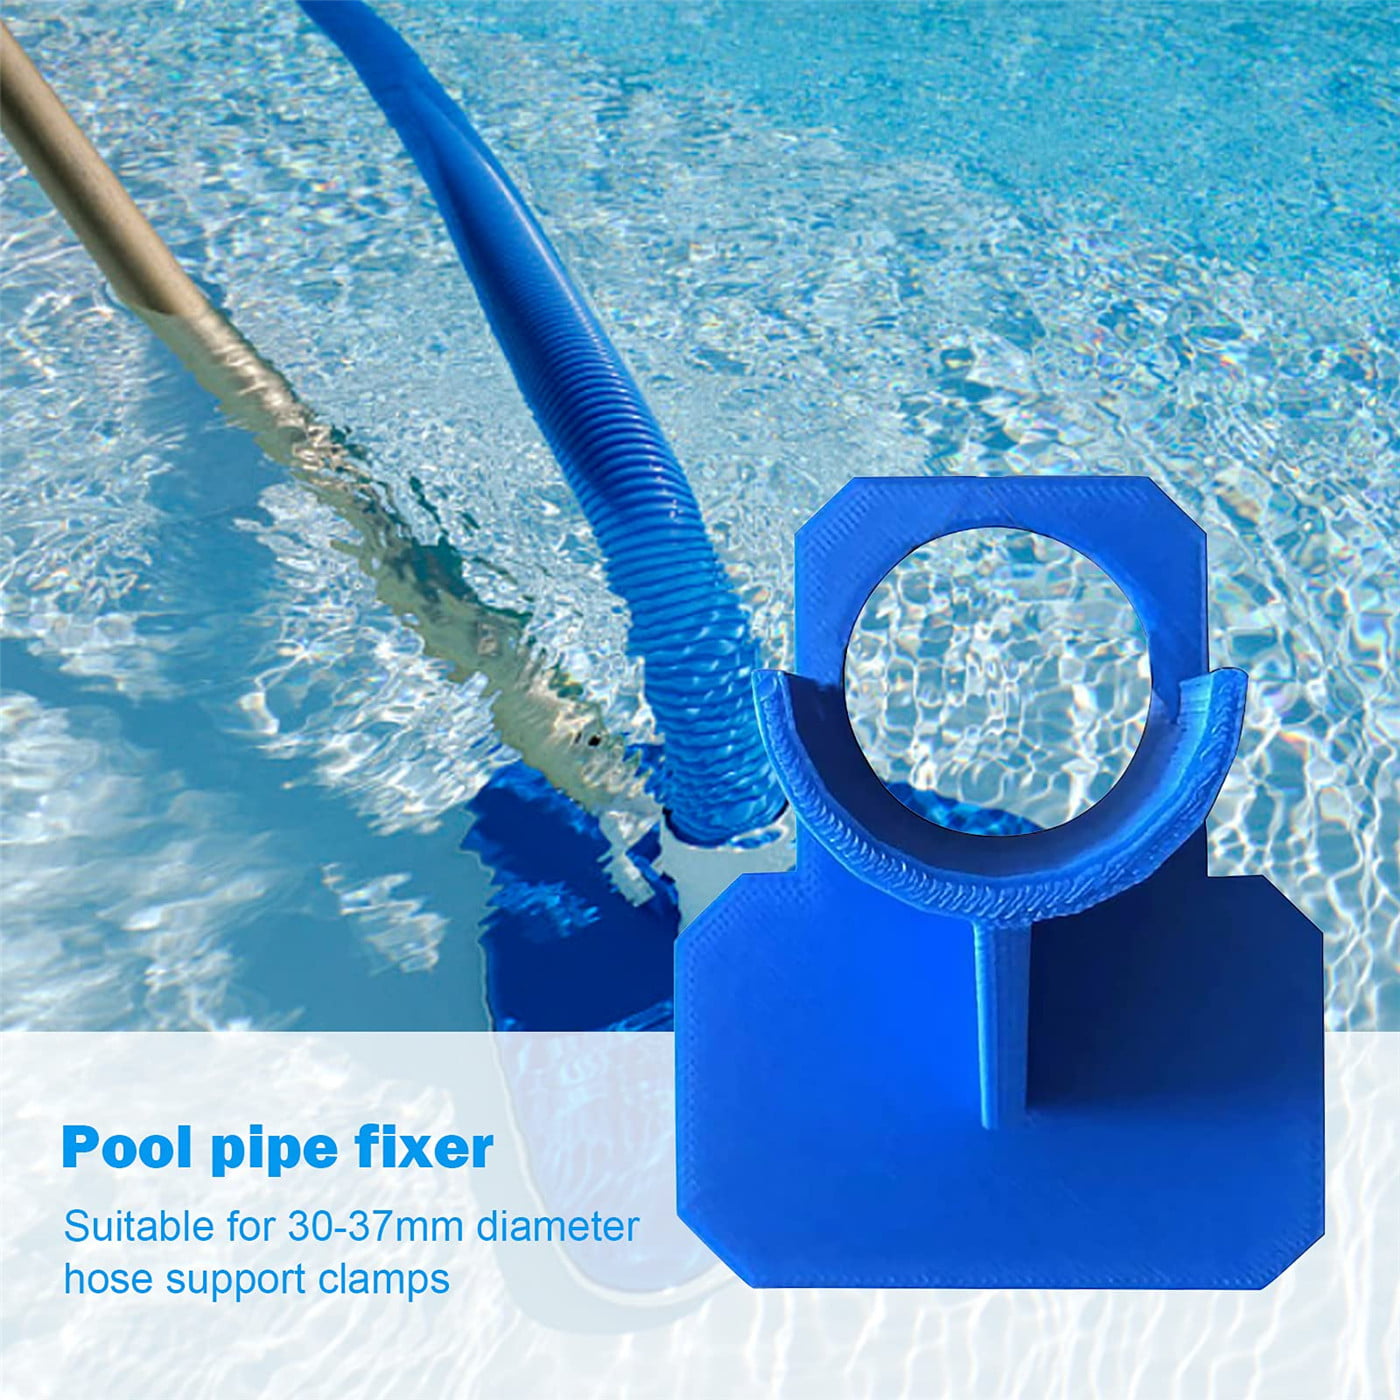 Tear Details about   Swimming Pool Pipe Holder Support 30-37mm Puncture Compa Anti: Strain 